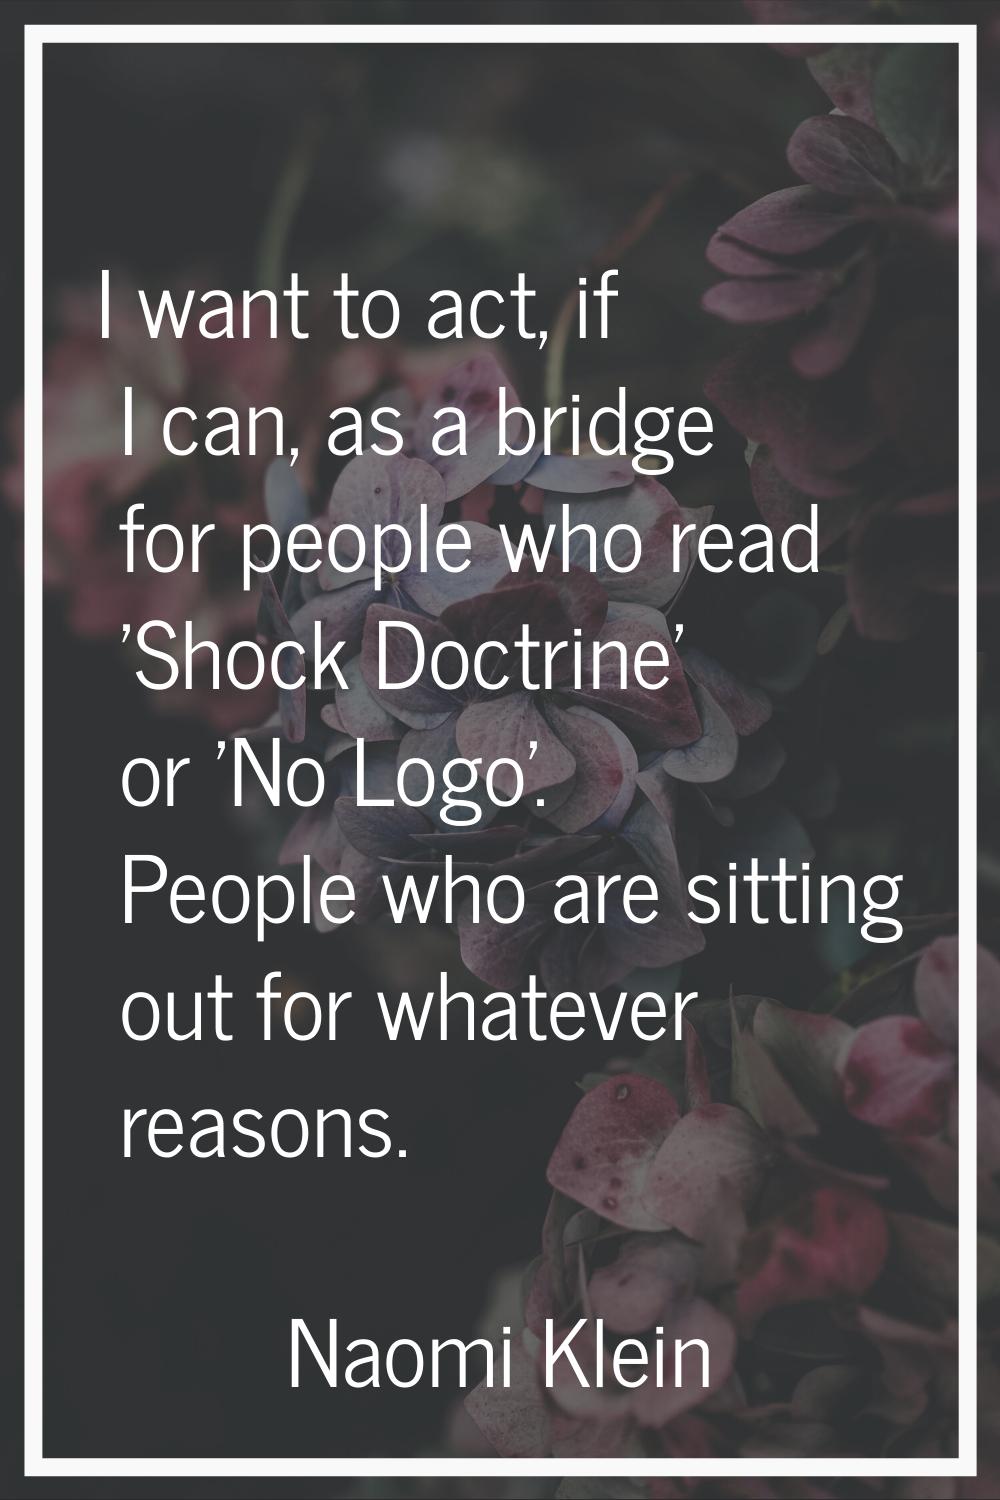 I want to act, if I can, as a bridge for people who read 'Shock Doctrine' or 'No Logo'. People who 